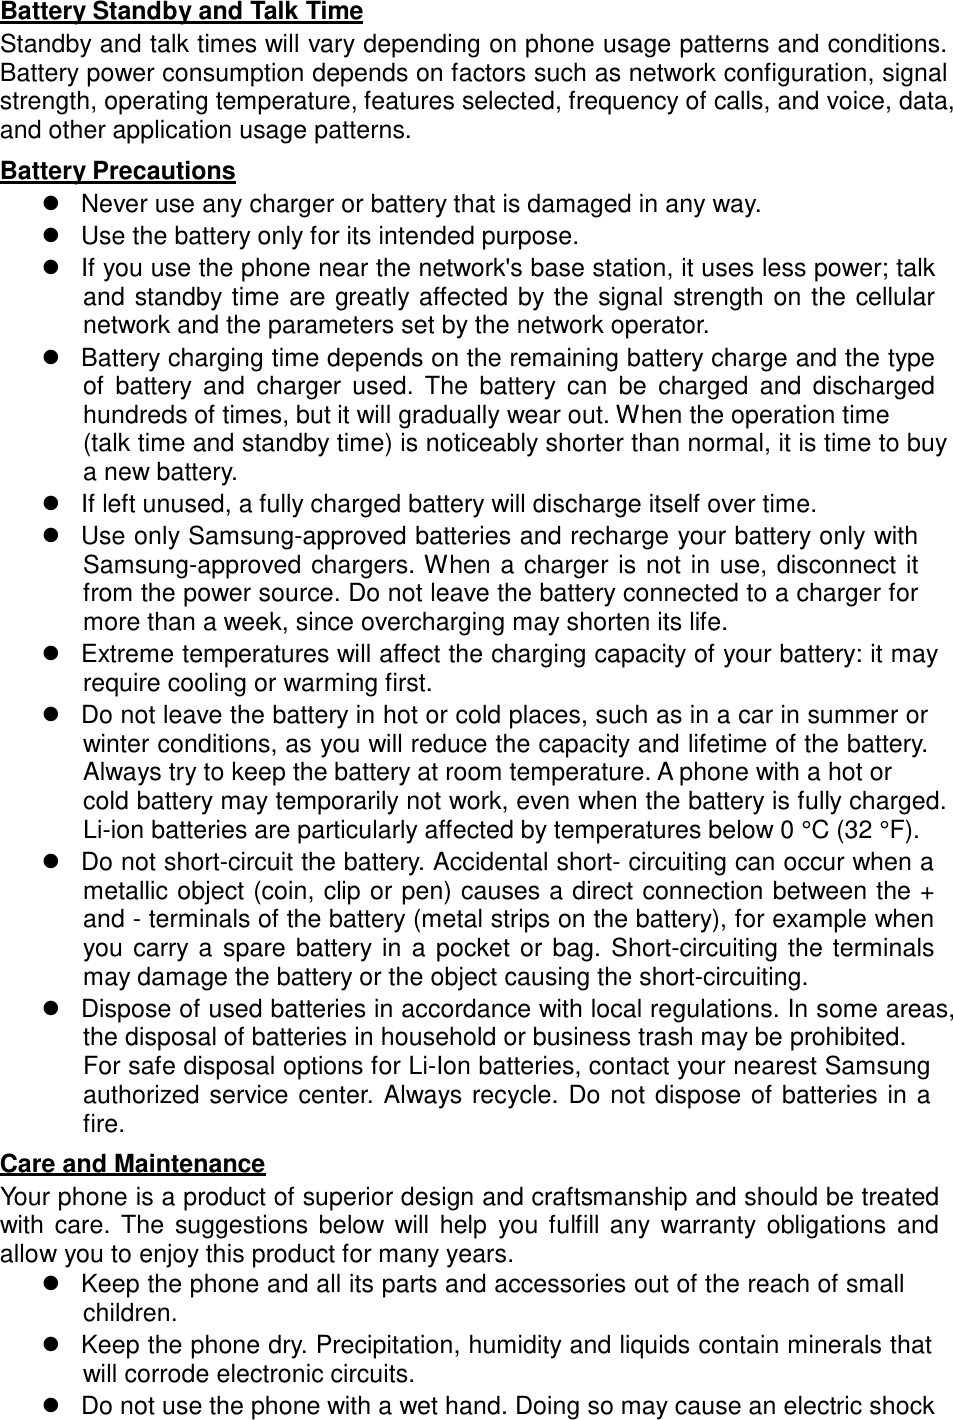   Battery Standby and Talk Time Standby and talk times will vary depending on phone usage patterns and conditions. Battery power consumption depends on factors such as network configuration, signal strength, operating temperature, features selected, frequency of calls, and voice, data, and other application usage patterns.  Battery Precautions  Never use any charger or battery that is damaged in any way.  Use the battery only for its intended purpose.  If you use the phone near the network&apos;s base station, it uses less power; talk and standby time  are greatly affected  by the signal strength on  the cellular network and the parameters set by the network operator.  Battery charging time depends on the remaining battery charge and the type of  battery  and  charger  used.  The  battery  can  be  charged  and  discharged hundreds of times, but it will gradually wear out. When the operation time (talk time and standby time) is noticeably shorter than normal, it is time to buy a new battery.  If left unused, a fully charged battery will discharge itself over time.  Use only Samsung-approved batteries and recharge your battery only with Samsung-approved chargers. When a charger is not  in use, disconnect it from the power source. Do not leave the battery connected to a charger for more than a week, since overcharging may shorten its life.  Extreme temperatures will affect the charging capacity of your battery: it may require cooling or warming first.  Do not leave the battery in hot or cold places, such as in a car in summer or winter conditions, as you will reduce the capacity and lifetime of the battery. Always try to keep the battery at room temperature. A phone with a hot or cold battery may temporarily not work, even when the battery is fully charged. Li-ion batteries are particularly affected by temperatures below 0 °C (32 °F).  Do not short-circuit the battery. Accidental short- circuiting can occur when a metallic object (coin, clip or pen) causes a direct connection between the + and - terminals of the battery (metal strips on the battery), for example when you carry  a  spare  battery  in  a  pocket  or  bag.  Short-circuiting  the  terminals may damage the battery or the object causing the short-circuiting.  Dispose of used batteries in accordance with local regulations. In some areas, the disposal of batteries in household or business trash may be prohibited. For safe disposal options for Li-Ion batteries, contact your nearest Samsung authorized service center.  Always recycle.  Do not  dispose of batteries in a fire.  Care and Maintenance Your phone is a product of superior design and craftsmanship and should be treated with  care.  The  suggestions  below  will  help  you  fulfill  any  warranty obligations  and allow you to enjoy this product for many years.  Keep the phone and all its parts and accessories out of the reach of small children.  Keep the phone dry. Precipitation, humidity and liquids contain minerals that will corrode electronic circuits.  Do not use the phone with a wet hand. Doing so may cause an electric shock 